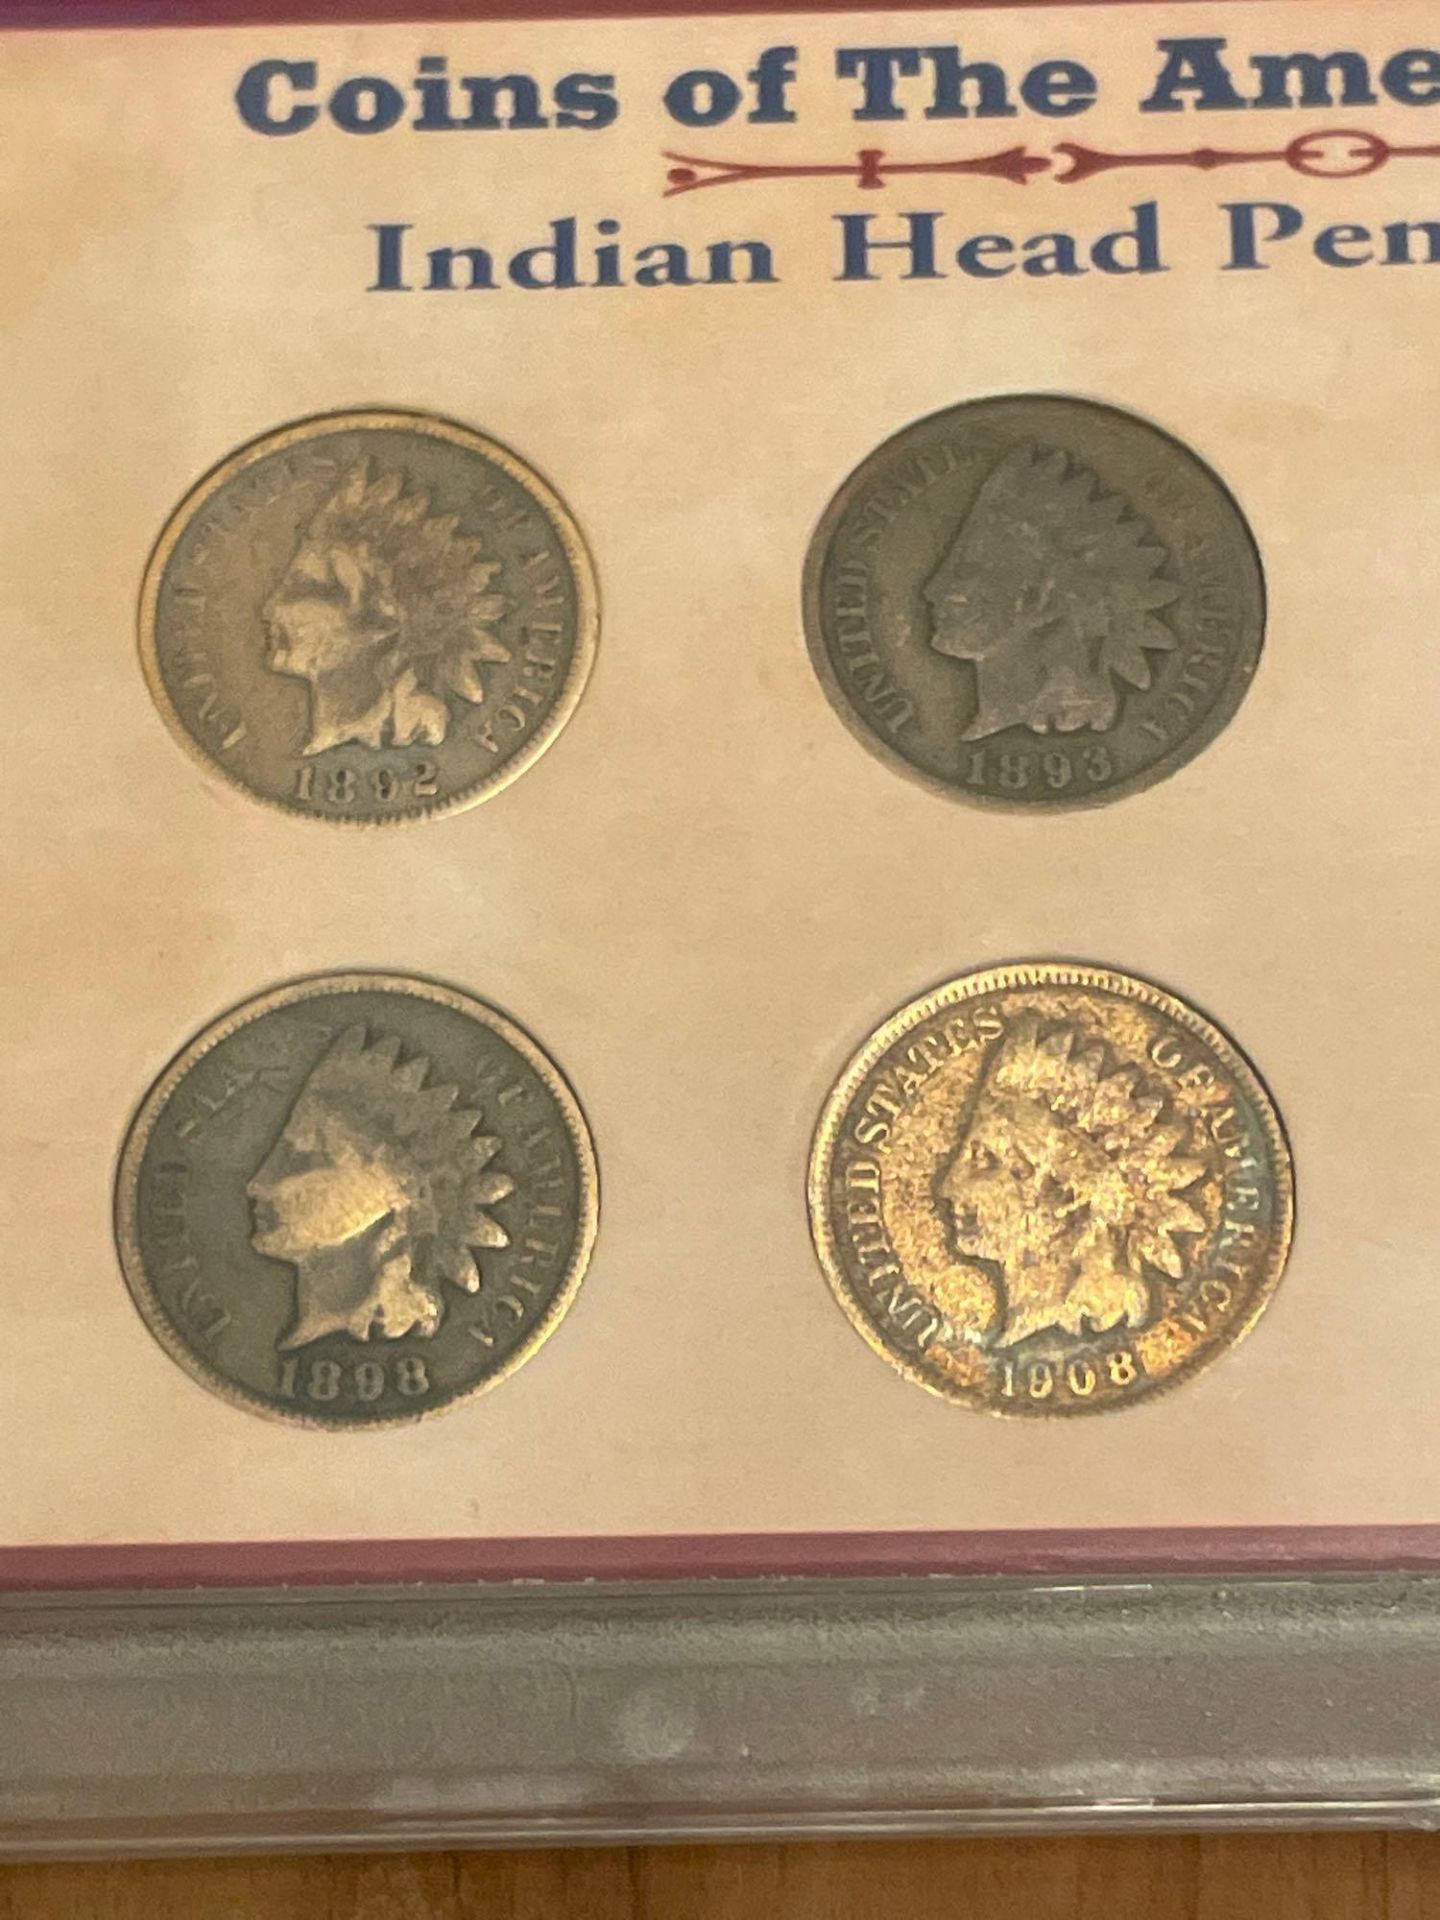 Coins of The American Frontier: Indian Head Penny Collection 1892, 1893, 1898, 1908 - Image 2 of 6